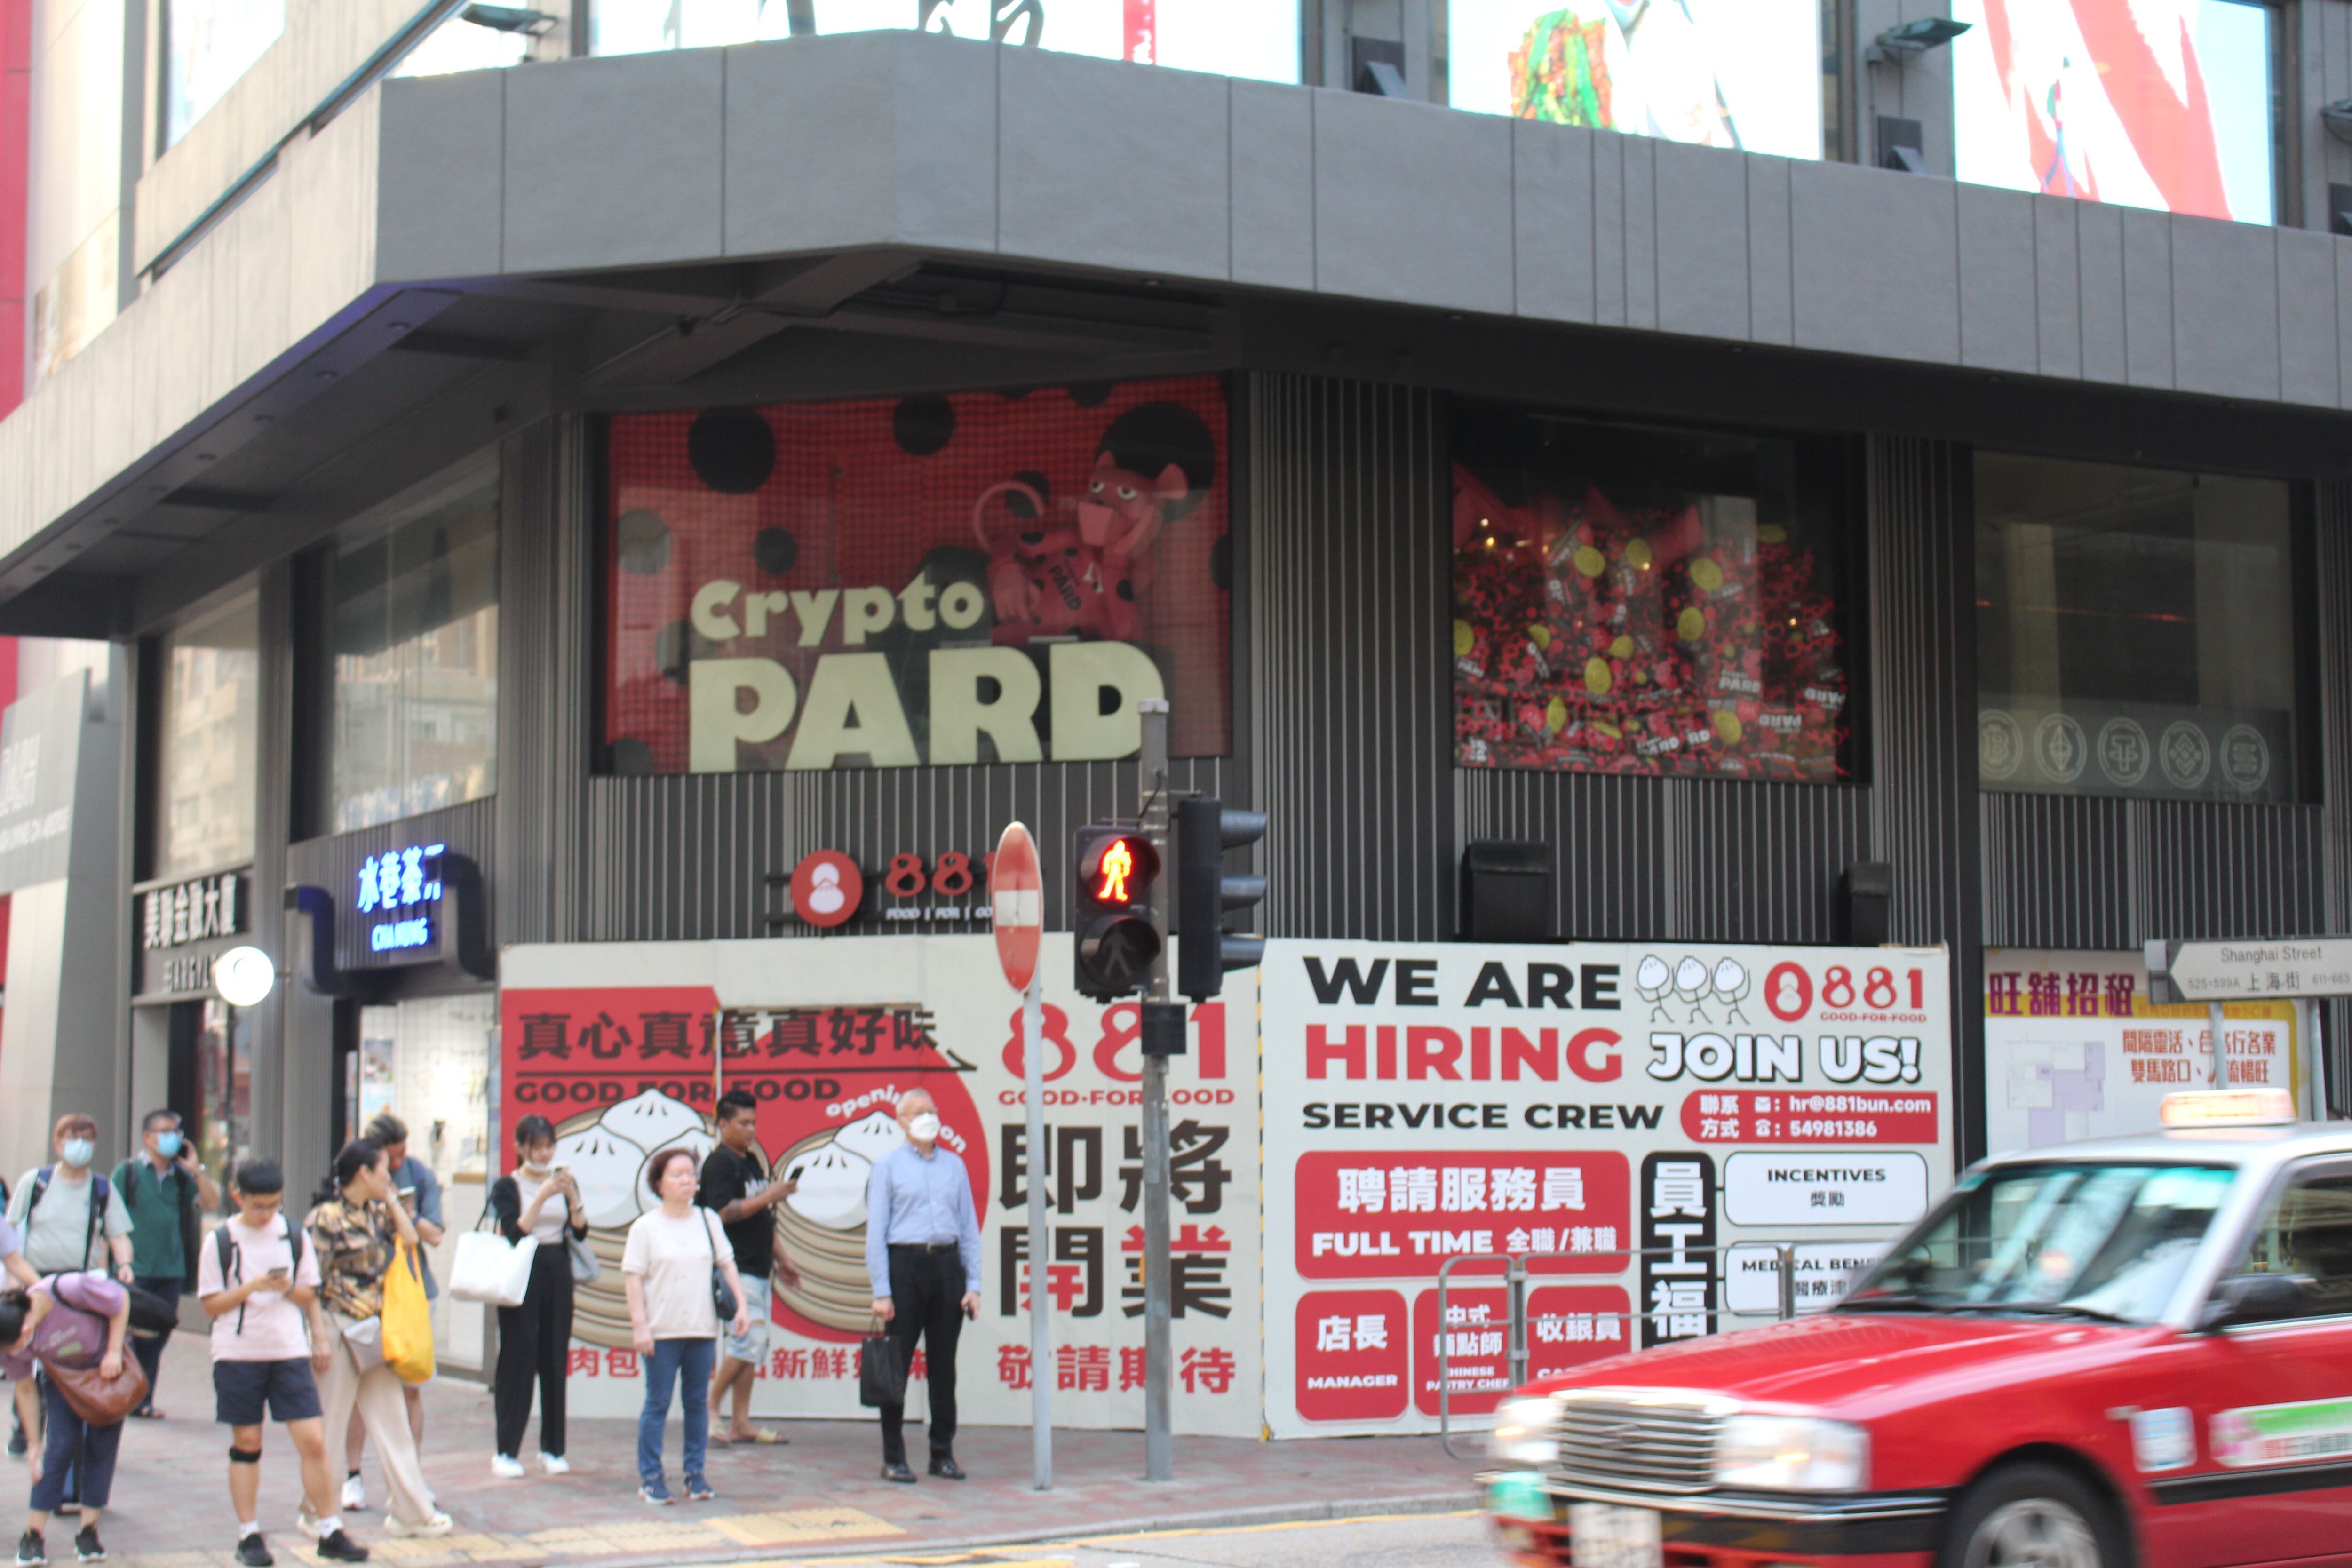 My tour of Hong Kong’s abandoned crypto outlets revealed a city whipsawed by an erratic industry